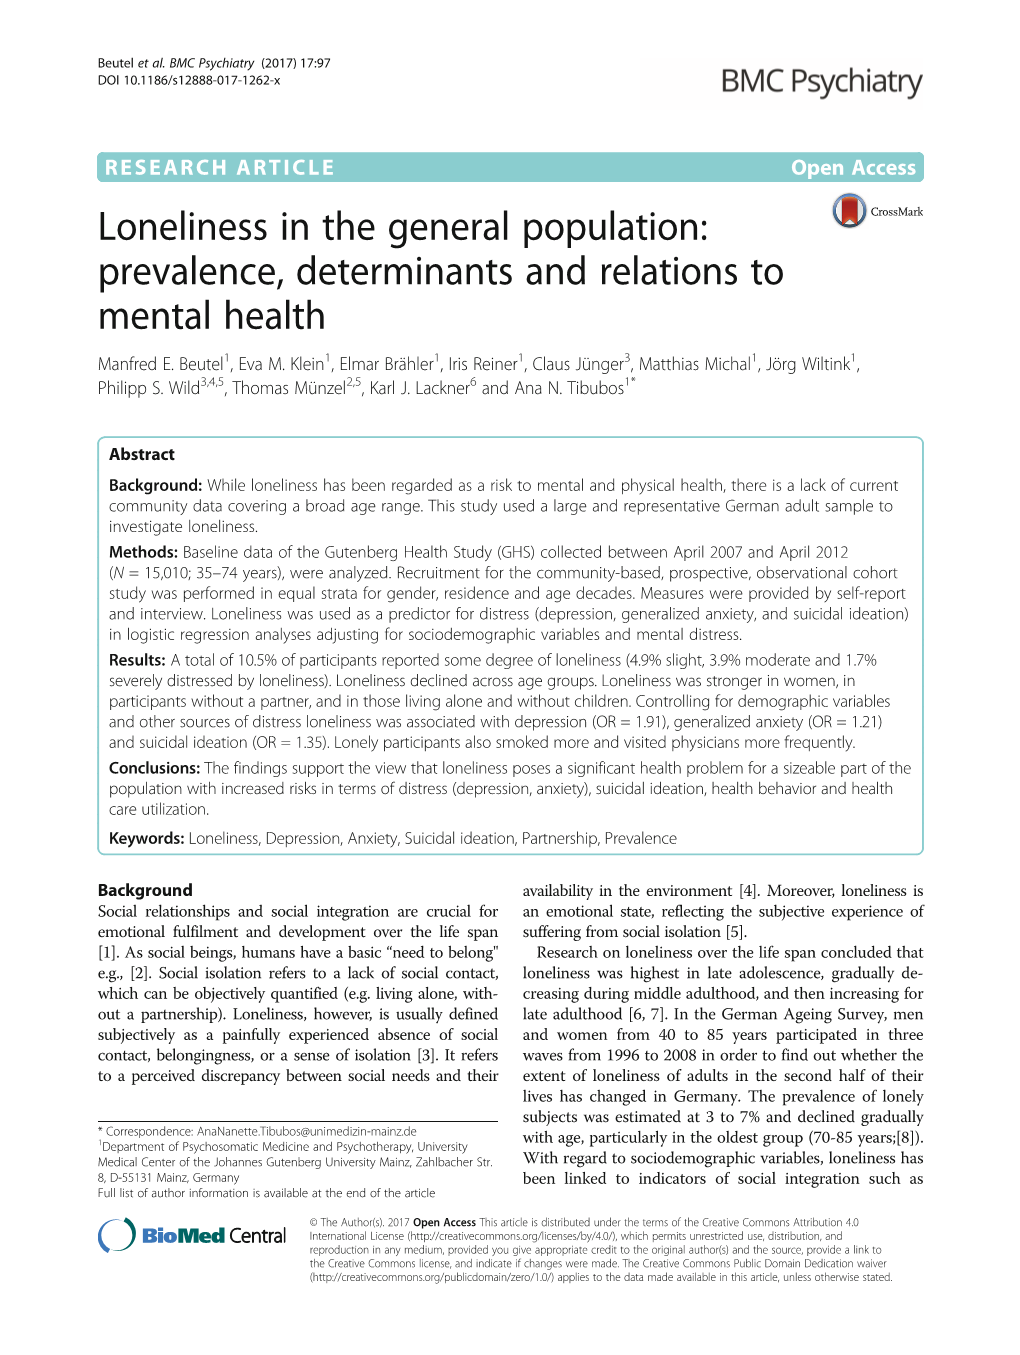 Loneliness in the General Population: Prevalence, Determinants and Relations to Mental Health Manfred E